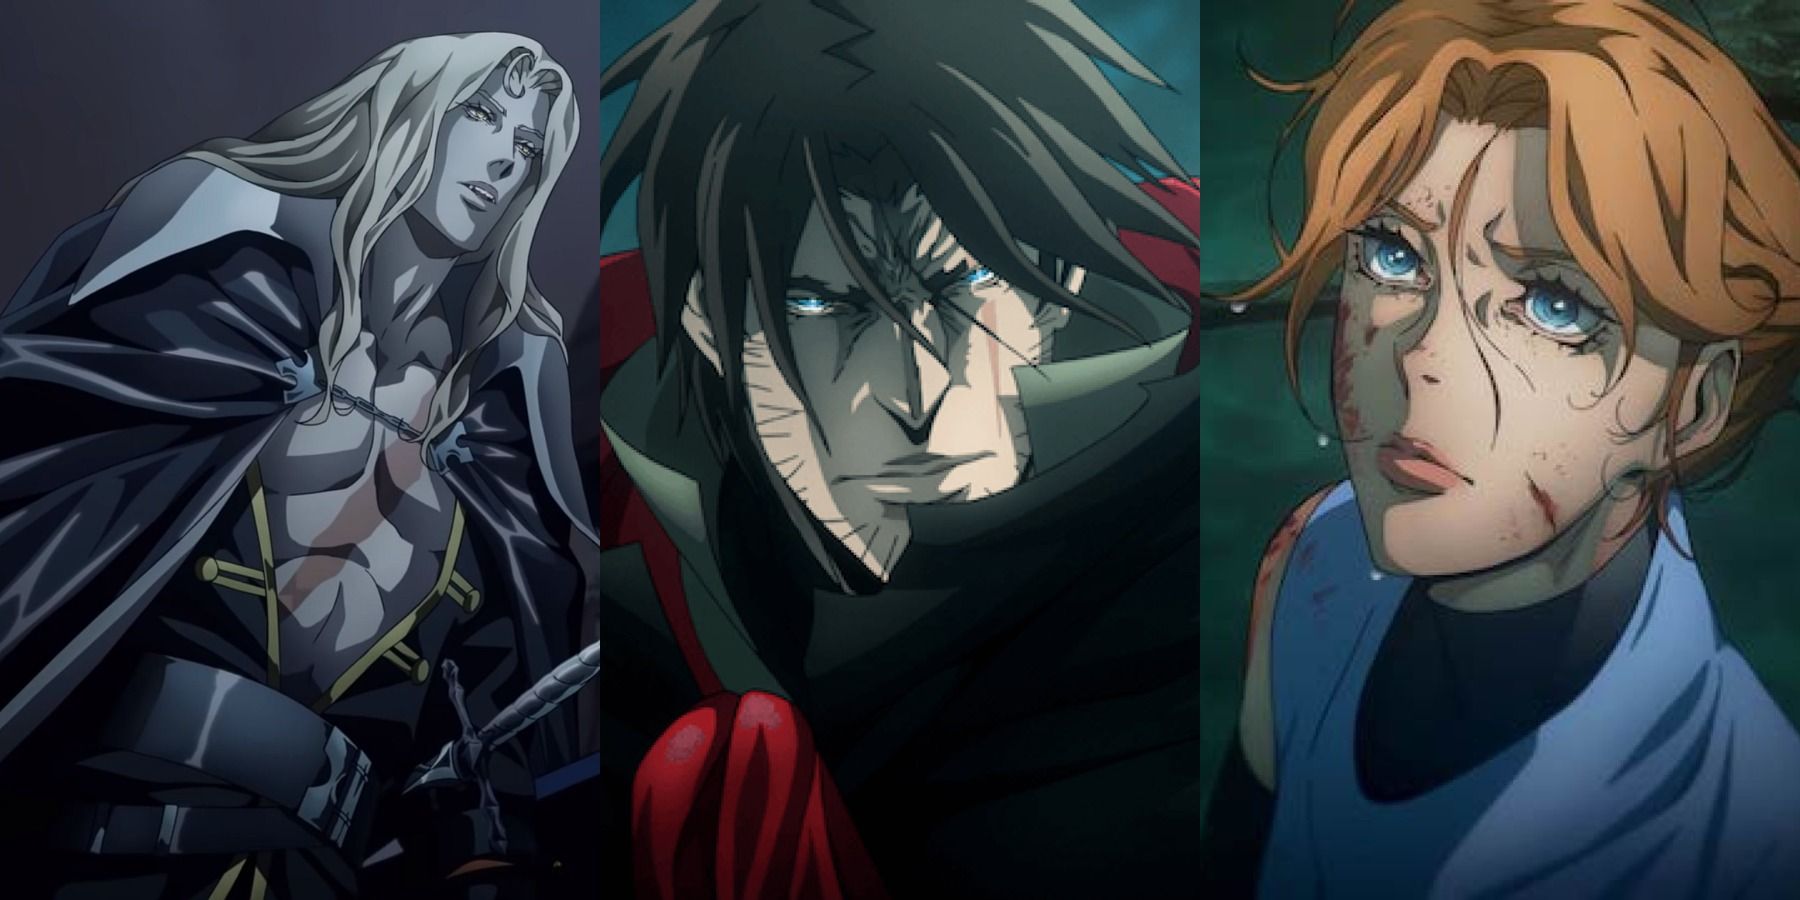 Castlevania: Nocturne Connections To The Original Anime Series